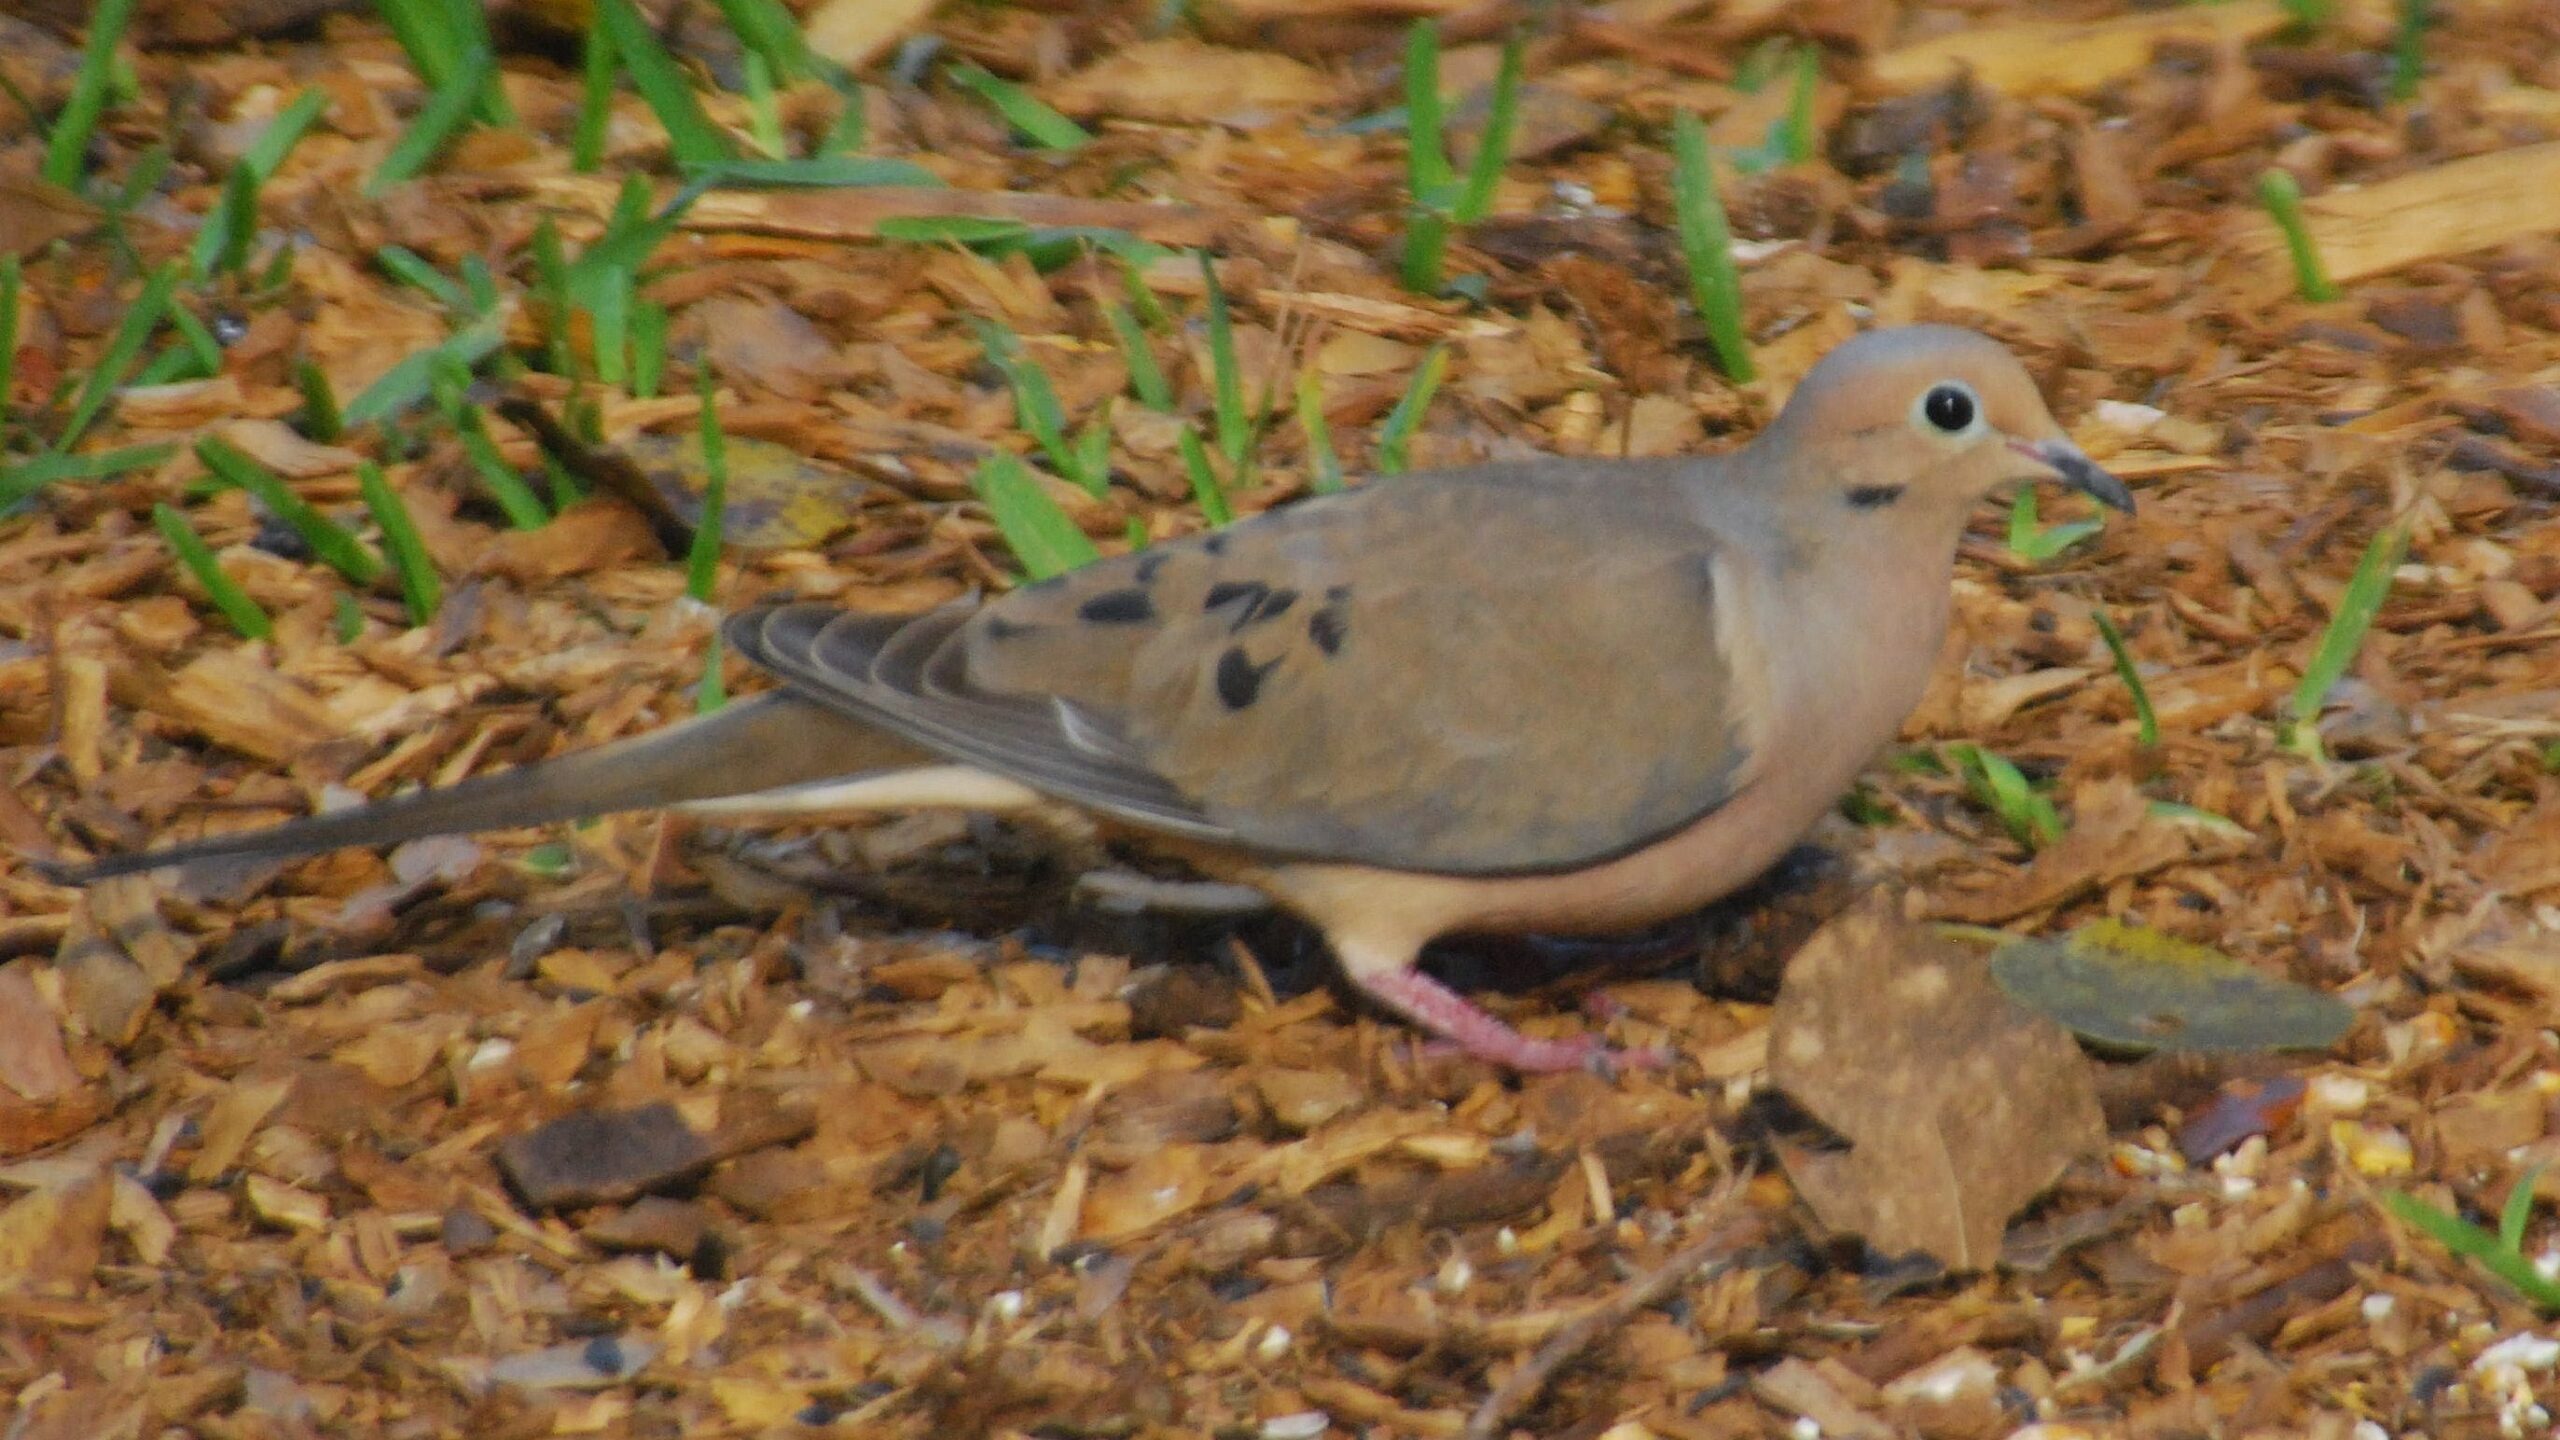 "Mourning Dove at Enchanted Forest Park"